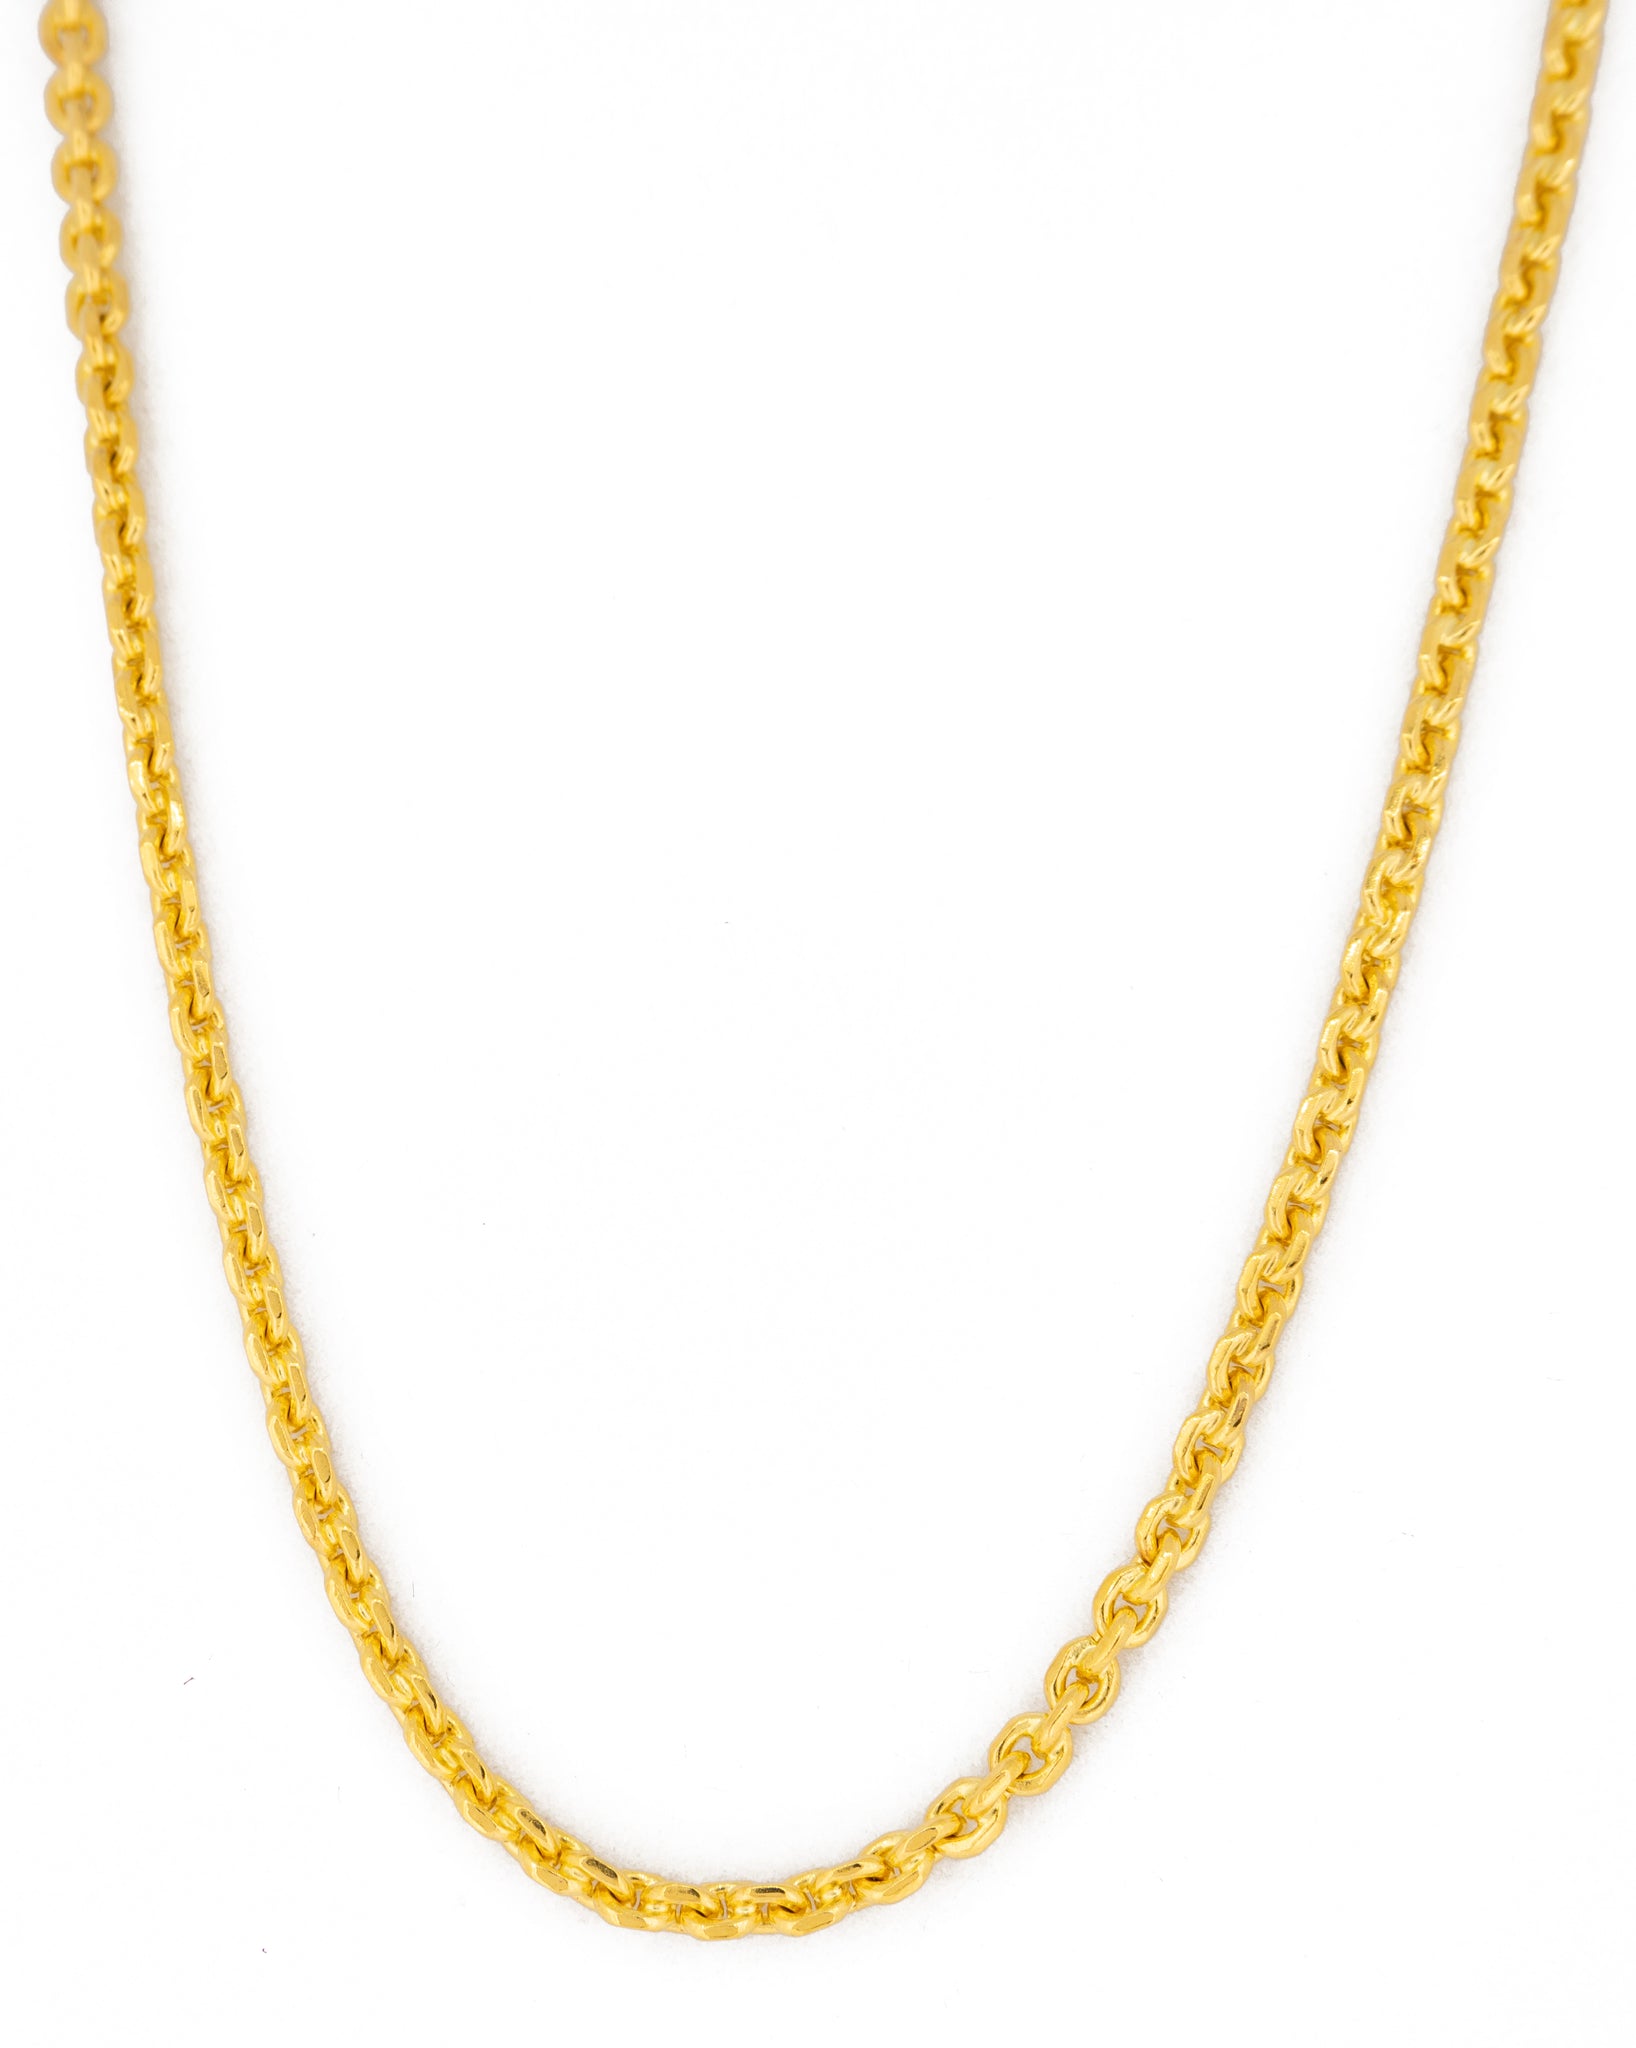 24K Gold Chain Necklace  (TD1659)